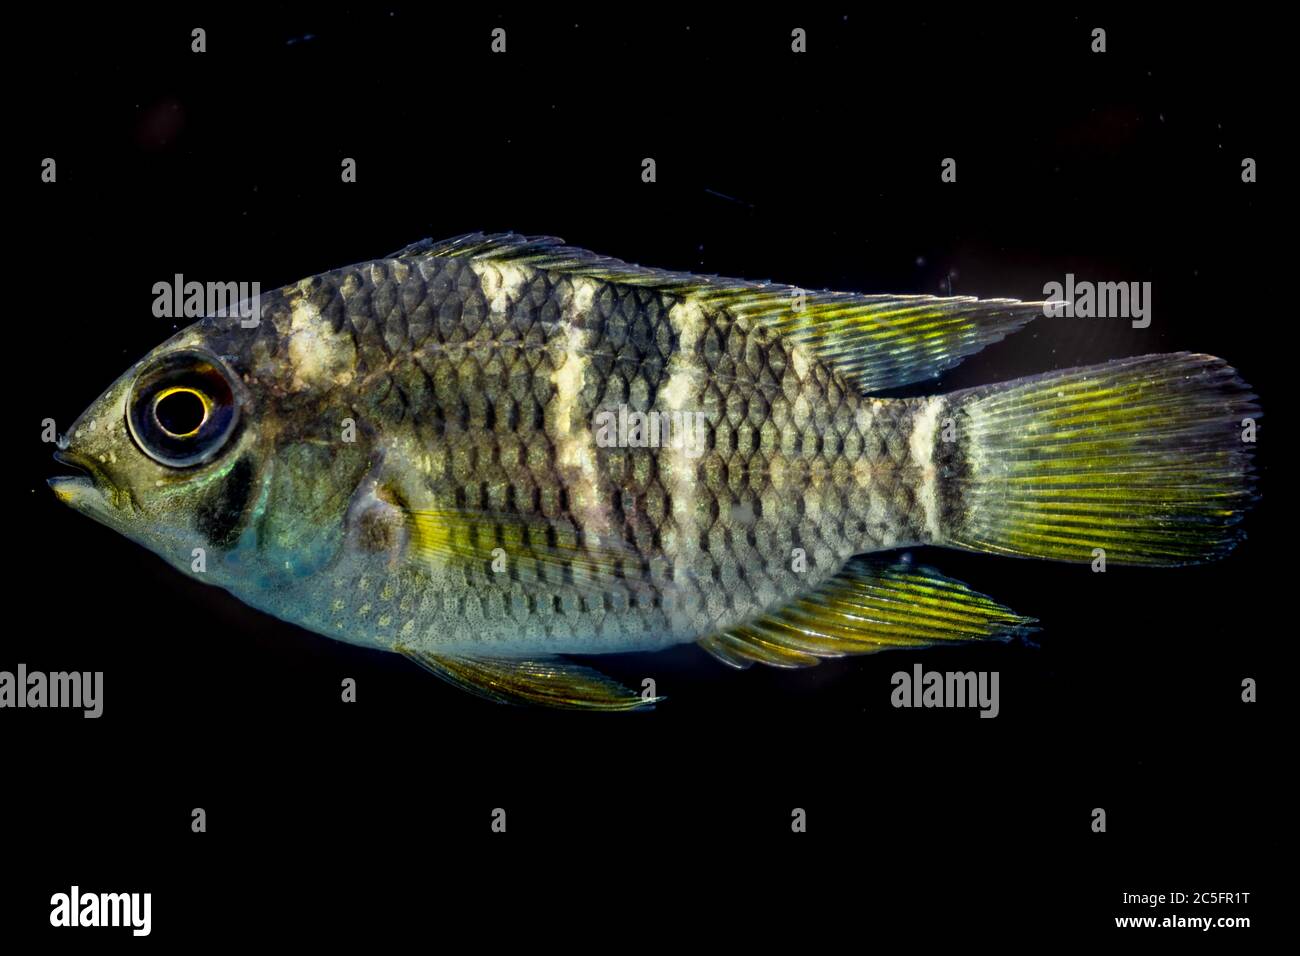 A Cichlid found in a river in the ecotone between the amazon jungle and the orinoco basin. Vichada - Colombia. Stock Photo